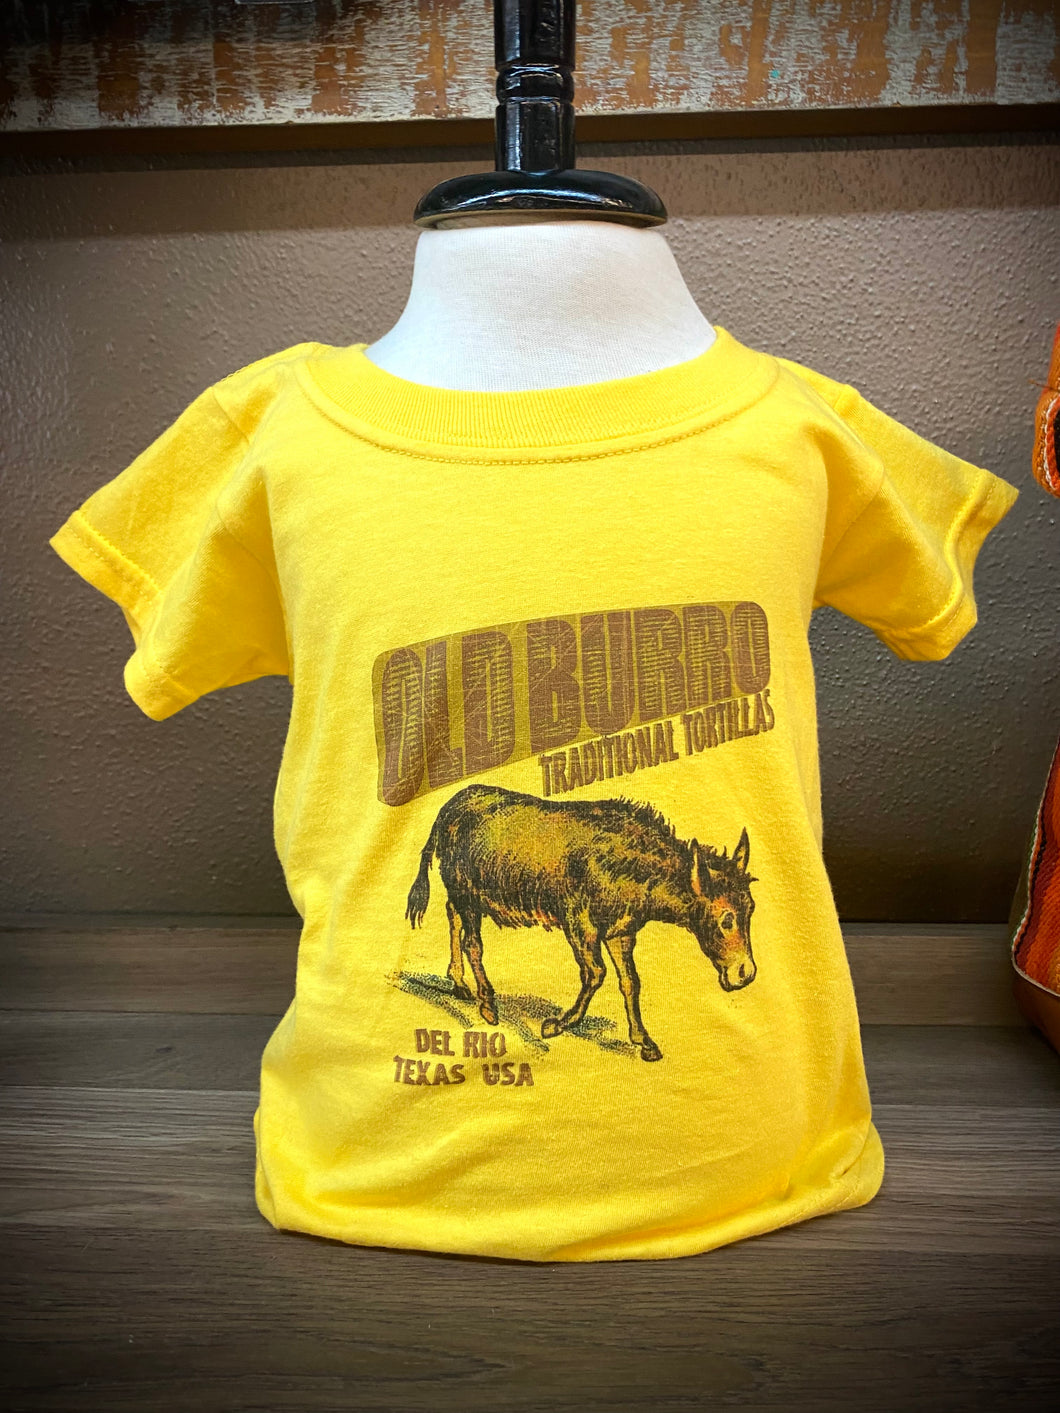 Old Burro Tortillas Toddlers Graphic Tee